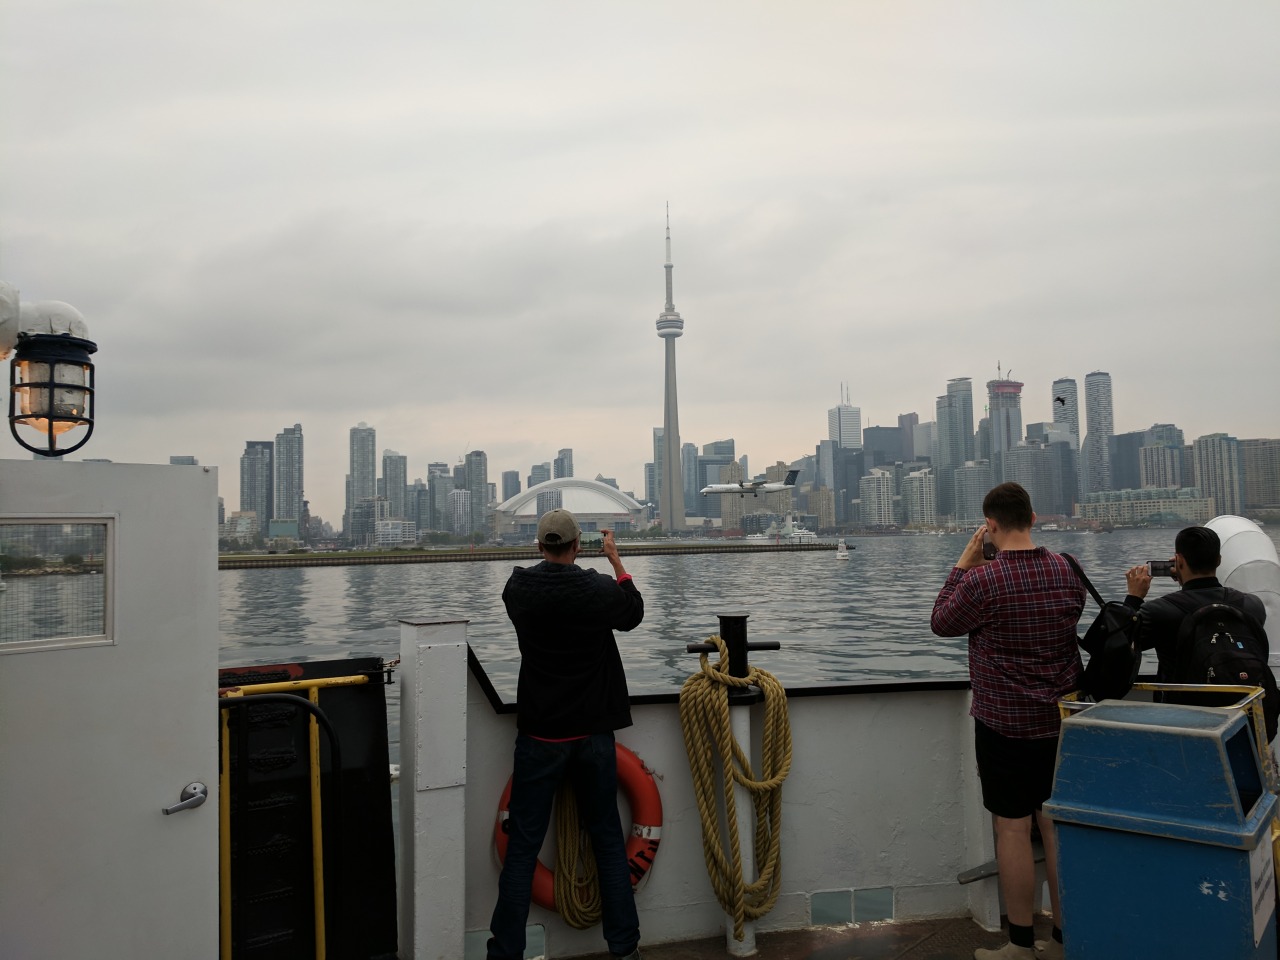 People on a boat taking photos of a plane landing at Toronto Airport